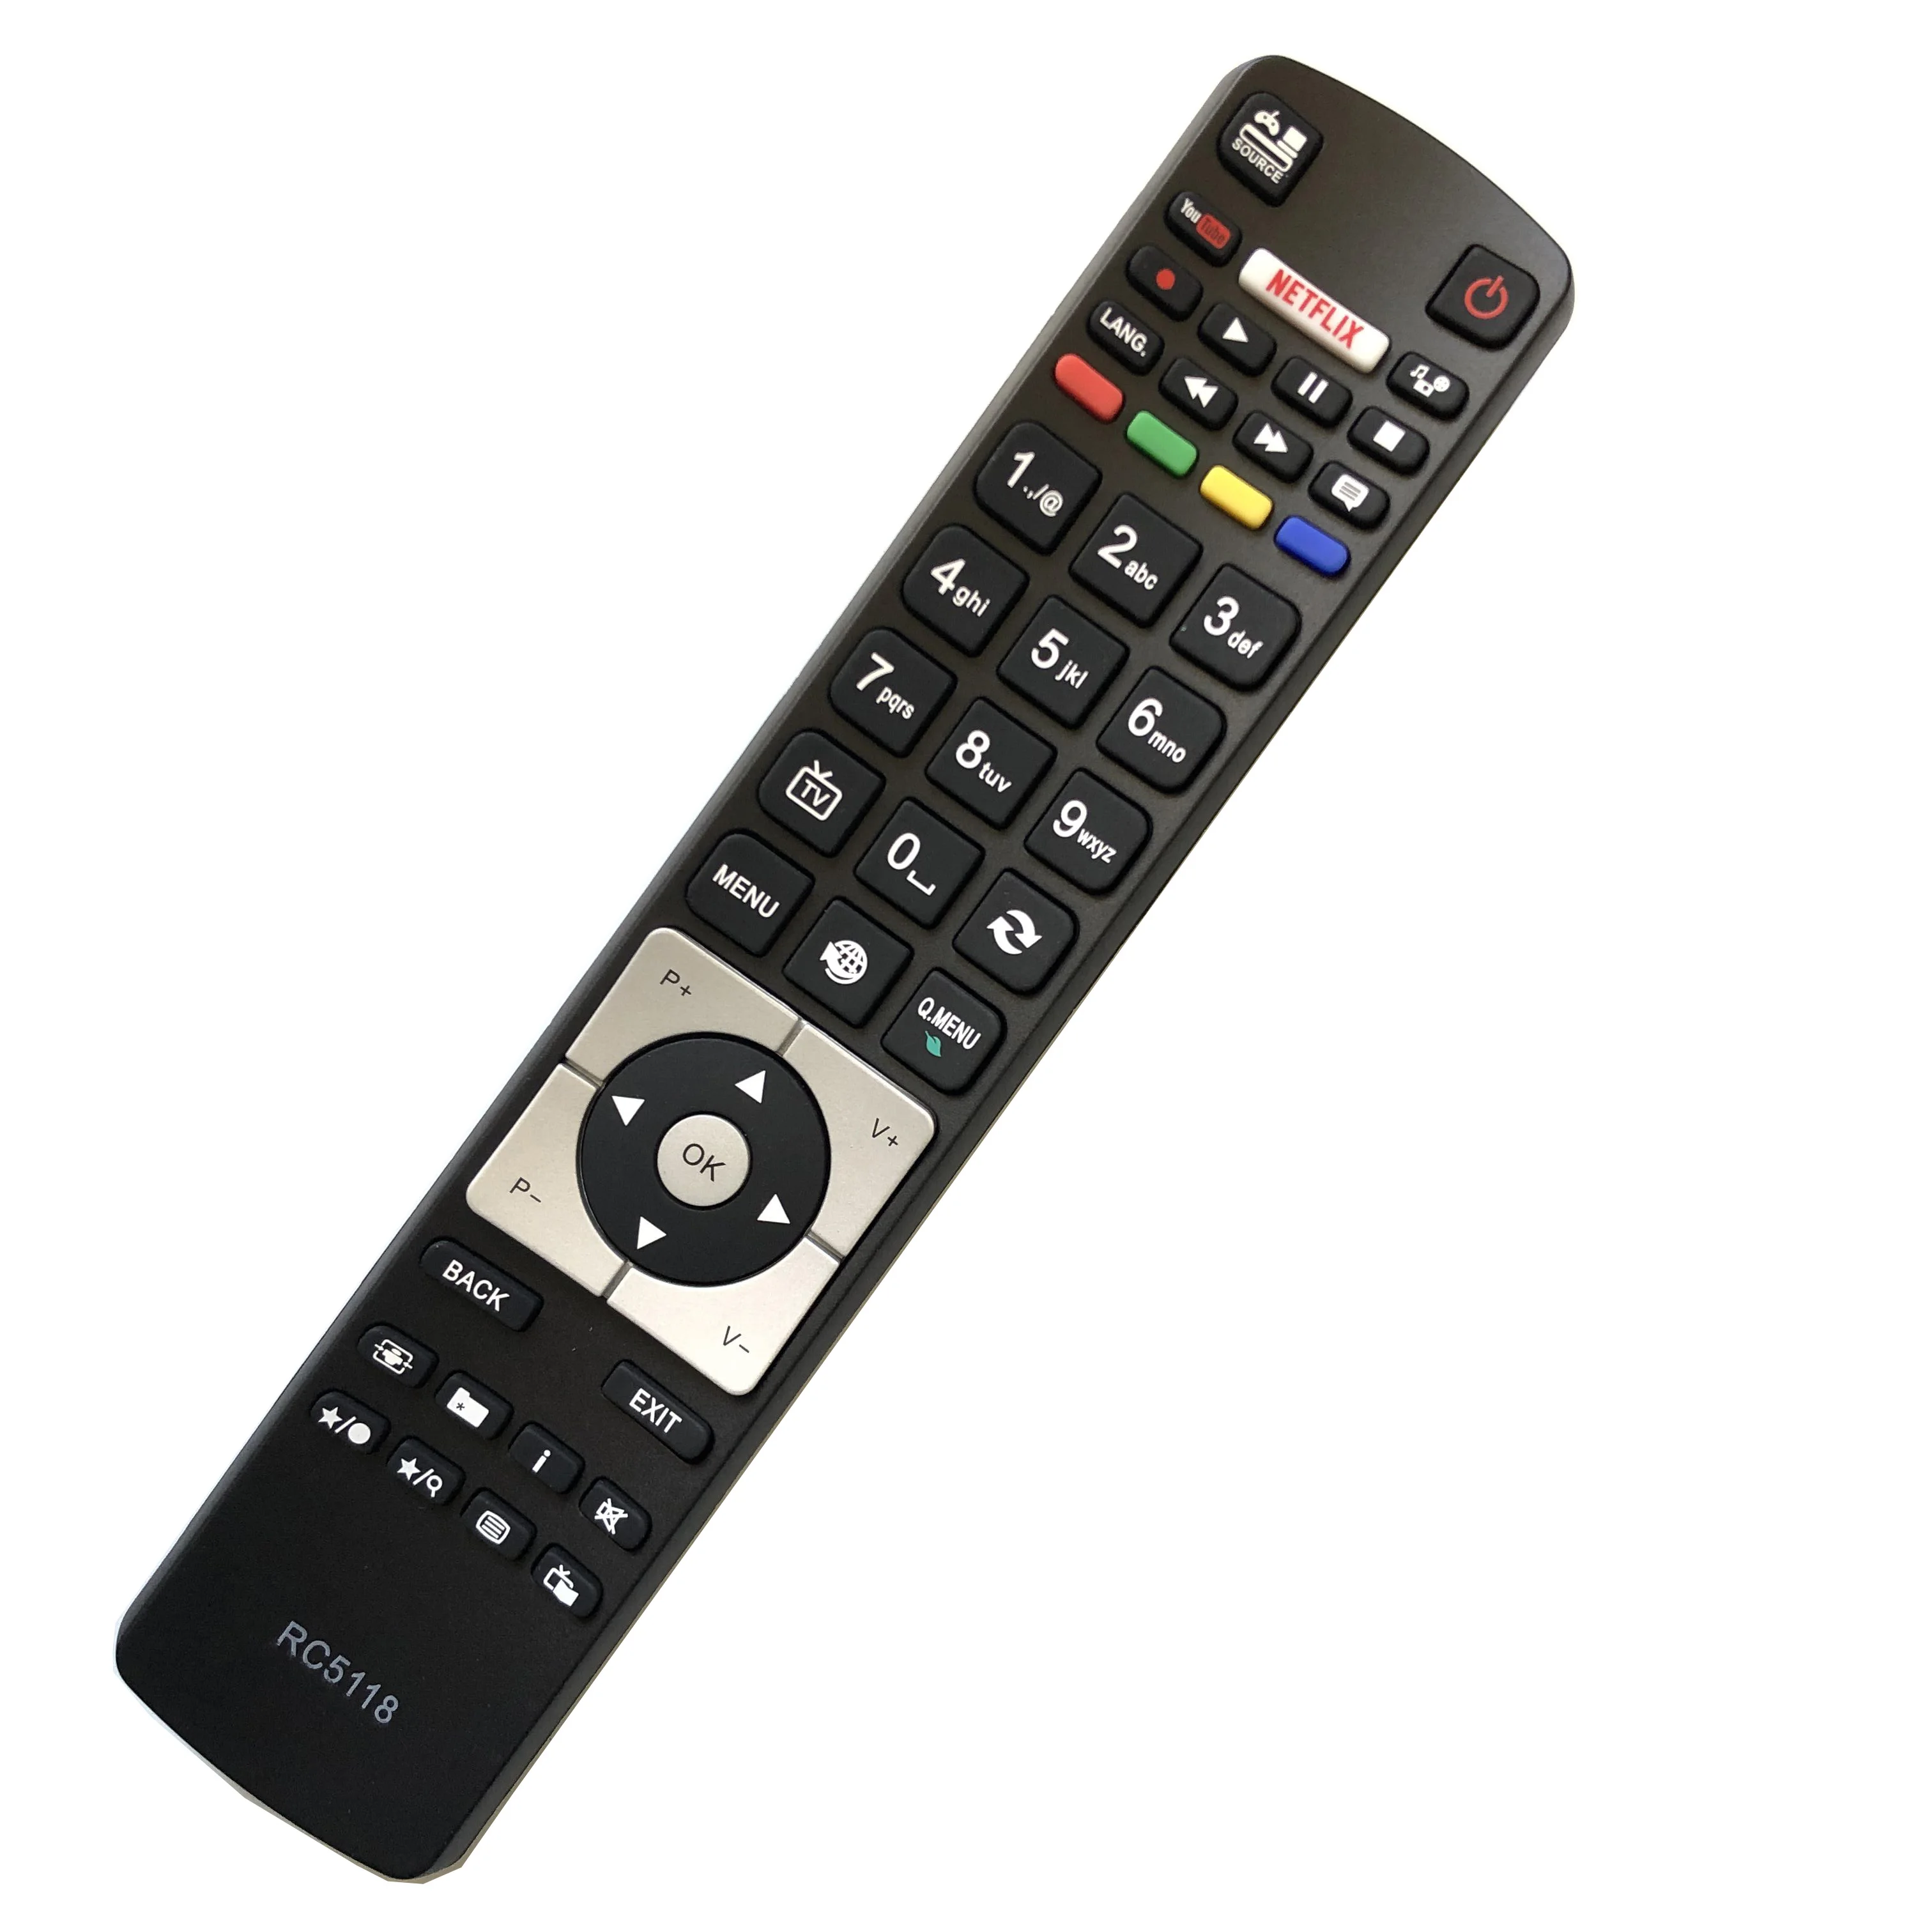 

New Replacement Remote Control For Telefunken TV Remote Control RC5118 with NETFLIX Fernbedienung